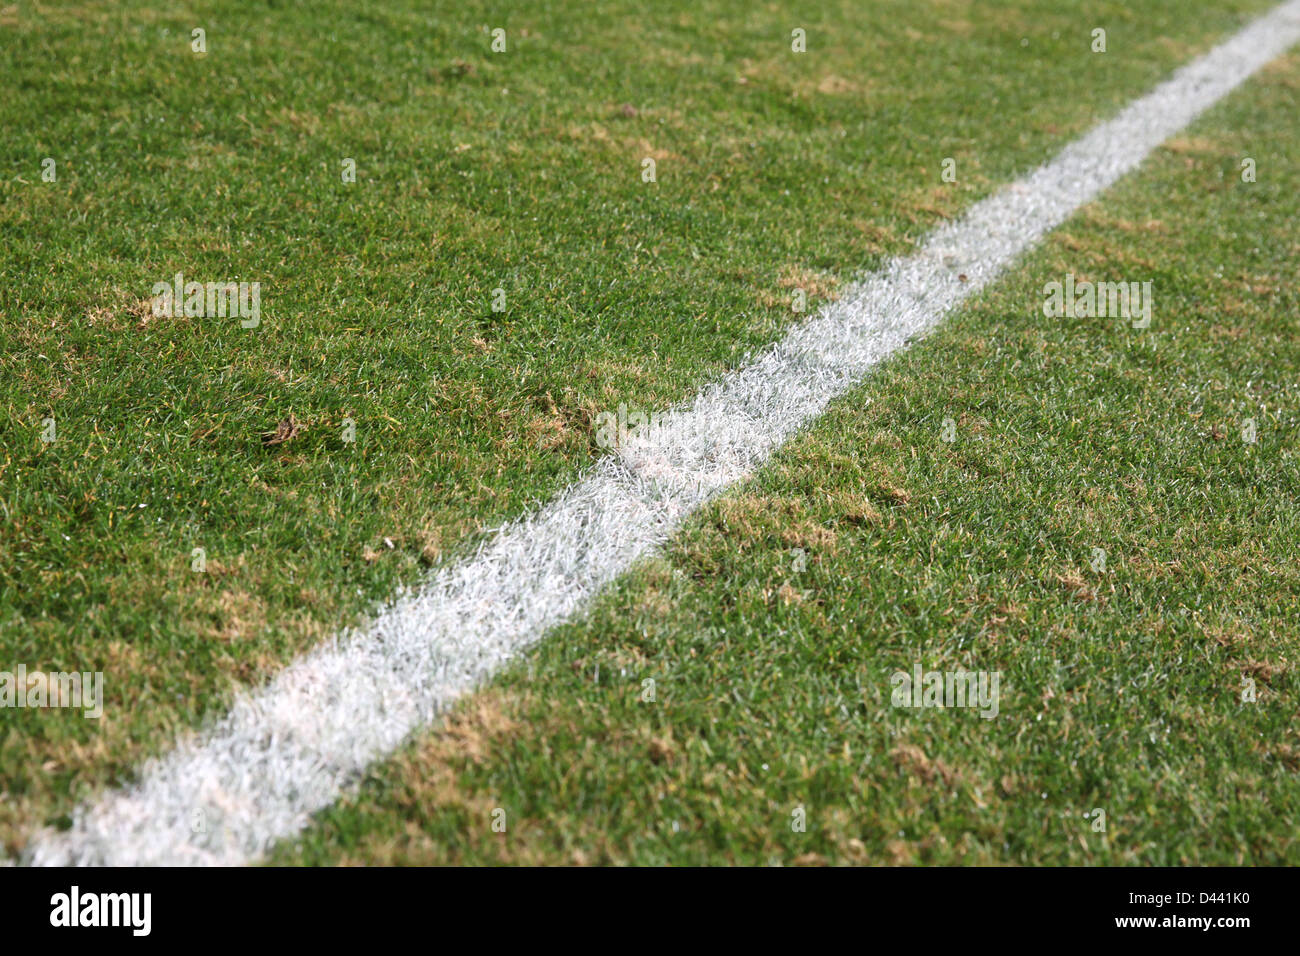 White line on a soccer field grass Stock Photo